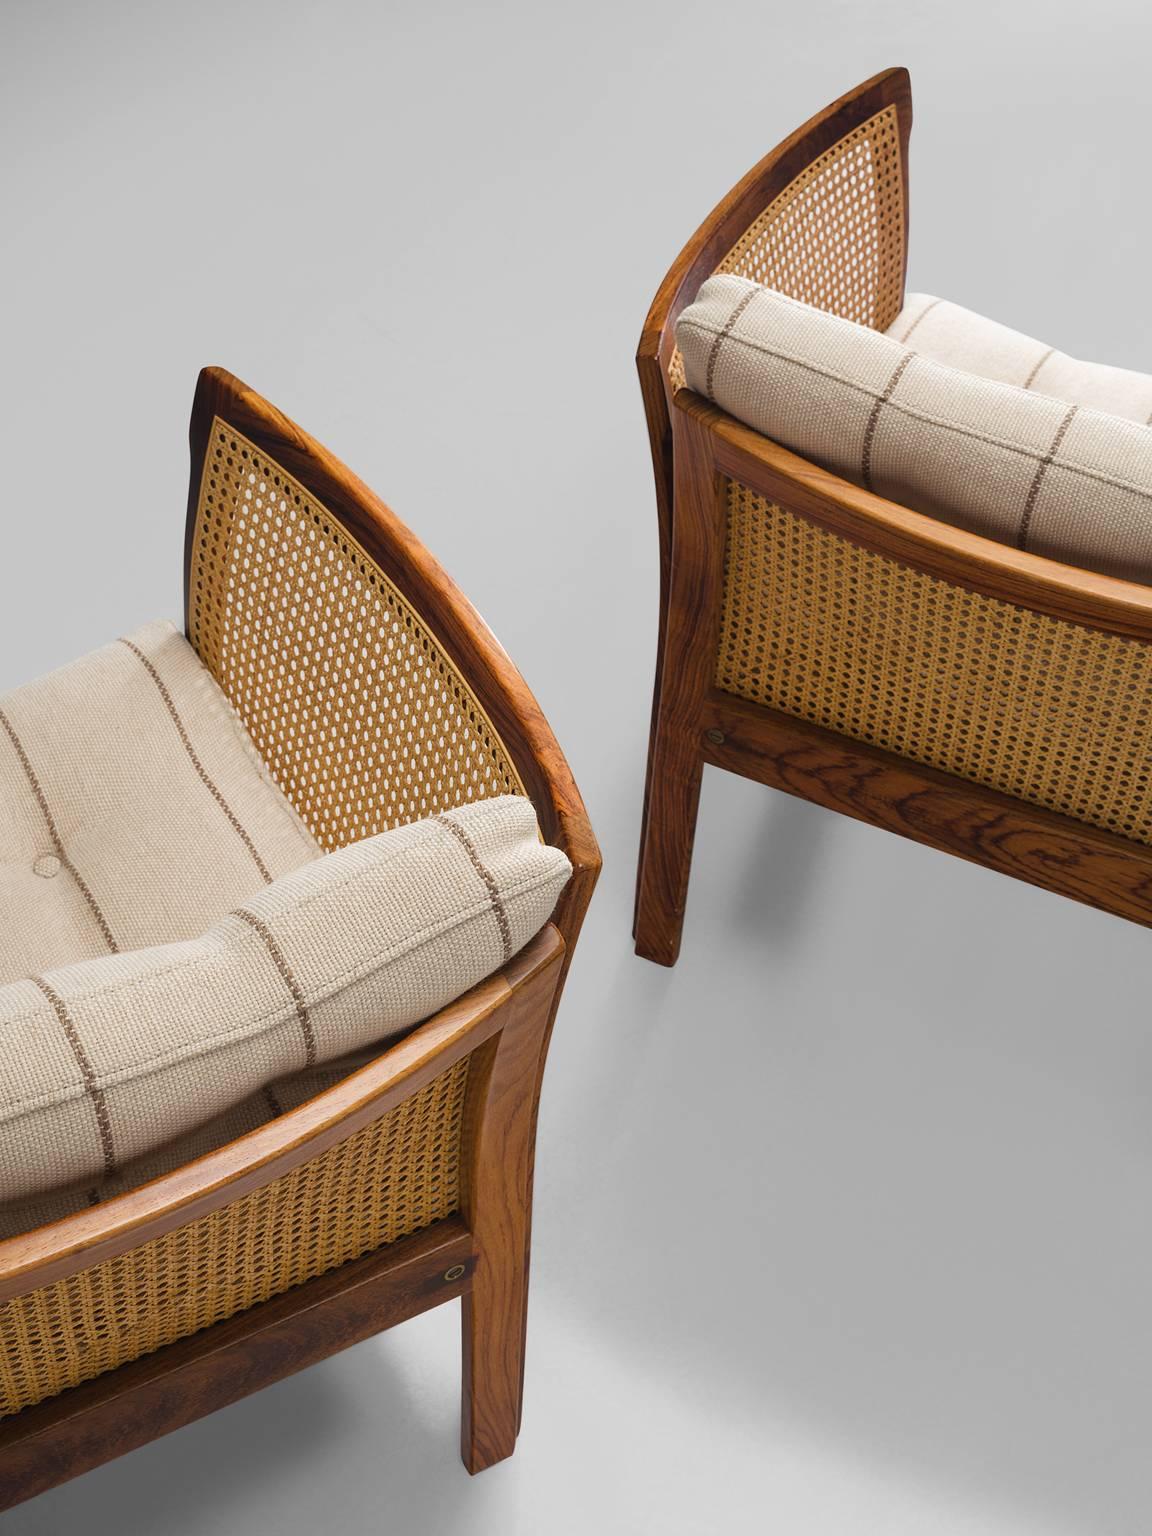 Mid-20th Century Illum Wikkelsø Pair of Chairs in Rosewood and Cane